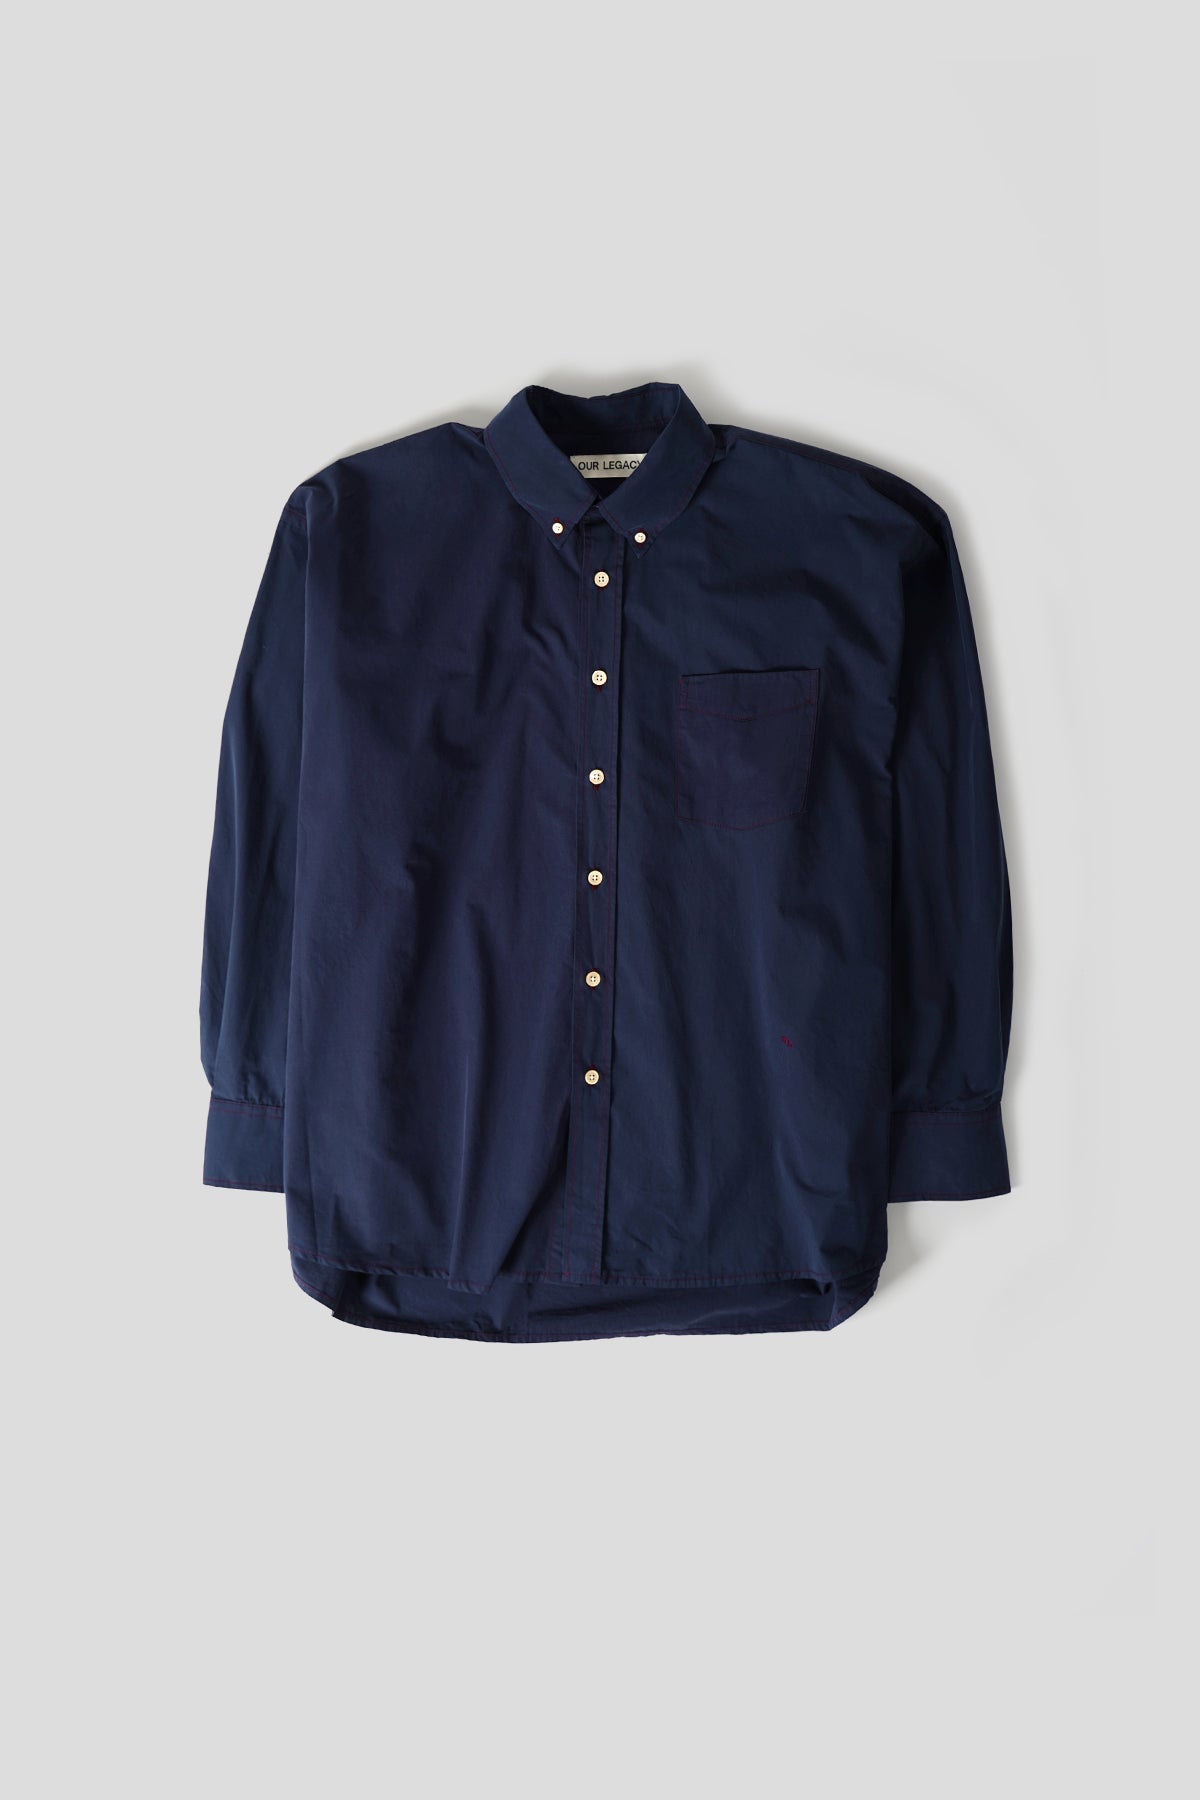 Our Legacy - BORROWED BD SHIRT NAVY - LE LABO STORE